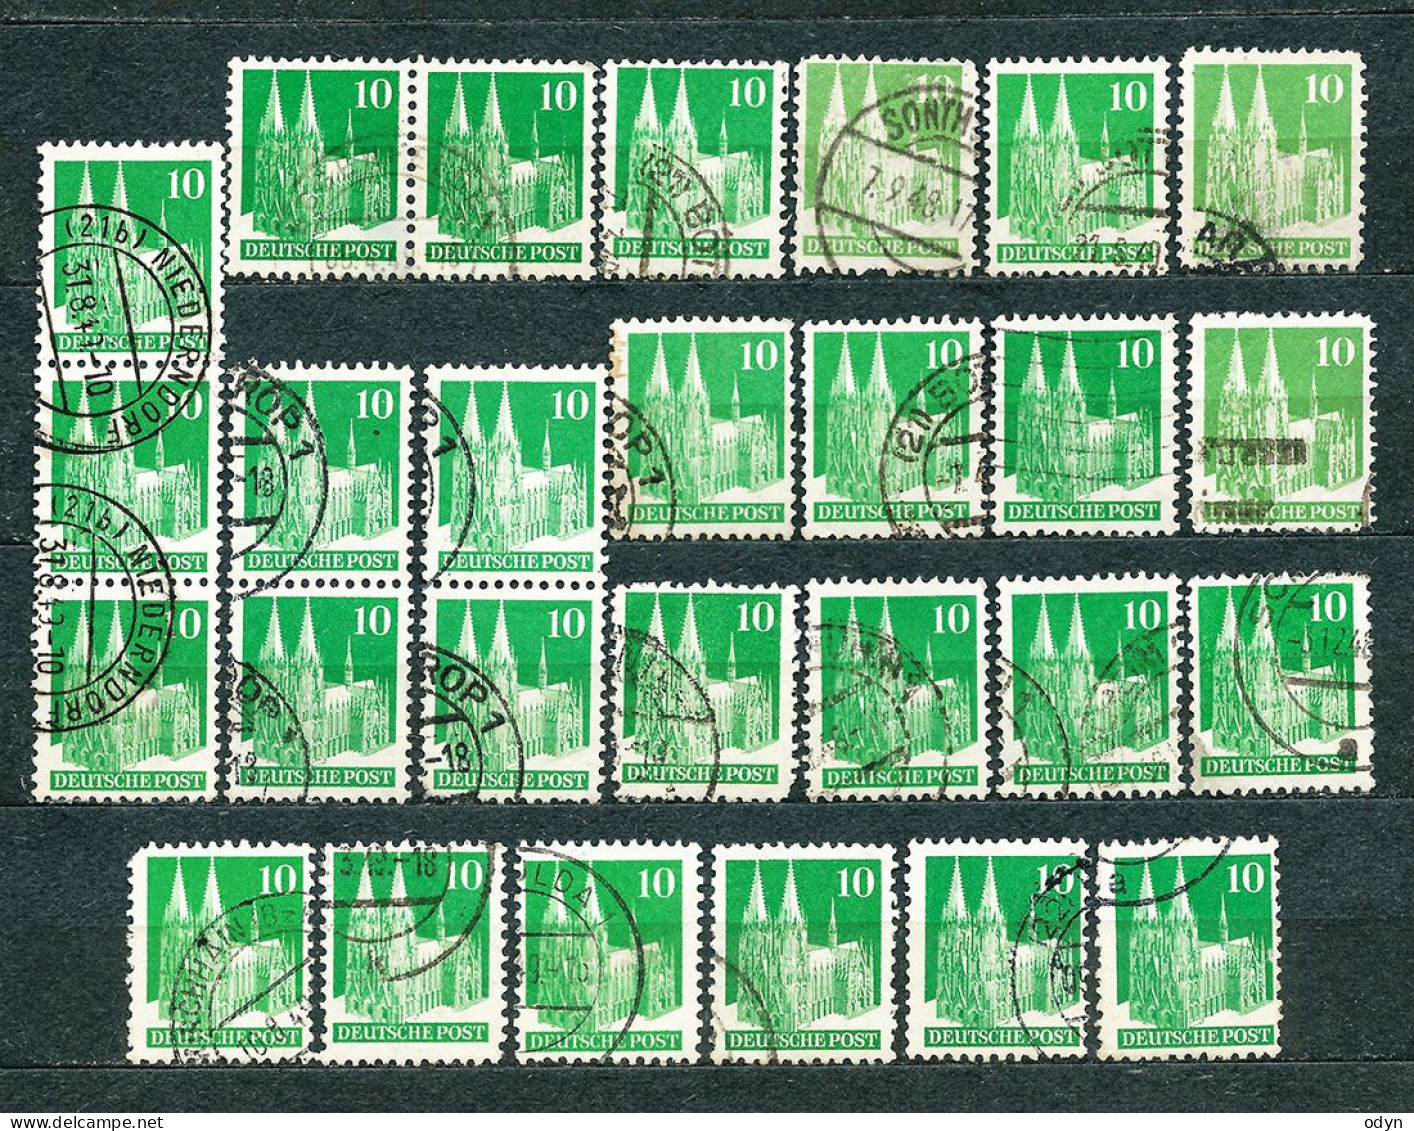 Germany, Am/Brit Zone 1948, lot of 188 stamps from set MiNr 73 wg - 100 wg incl. MiNr 100 I wg - used